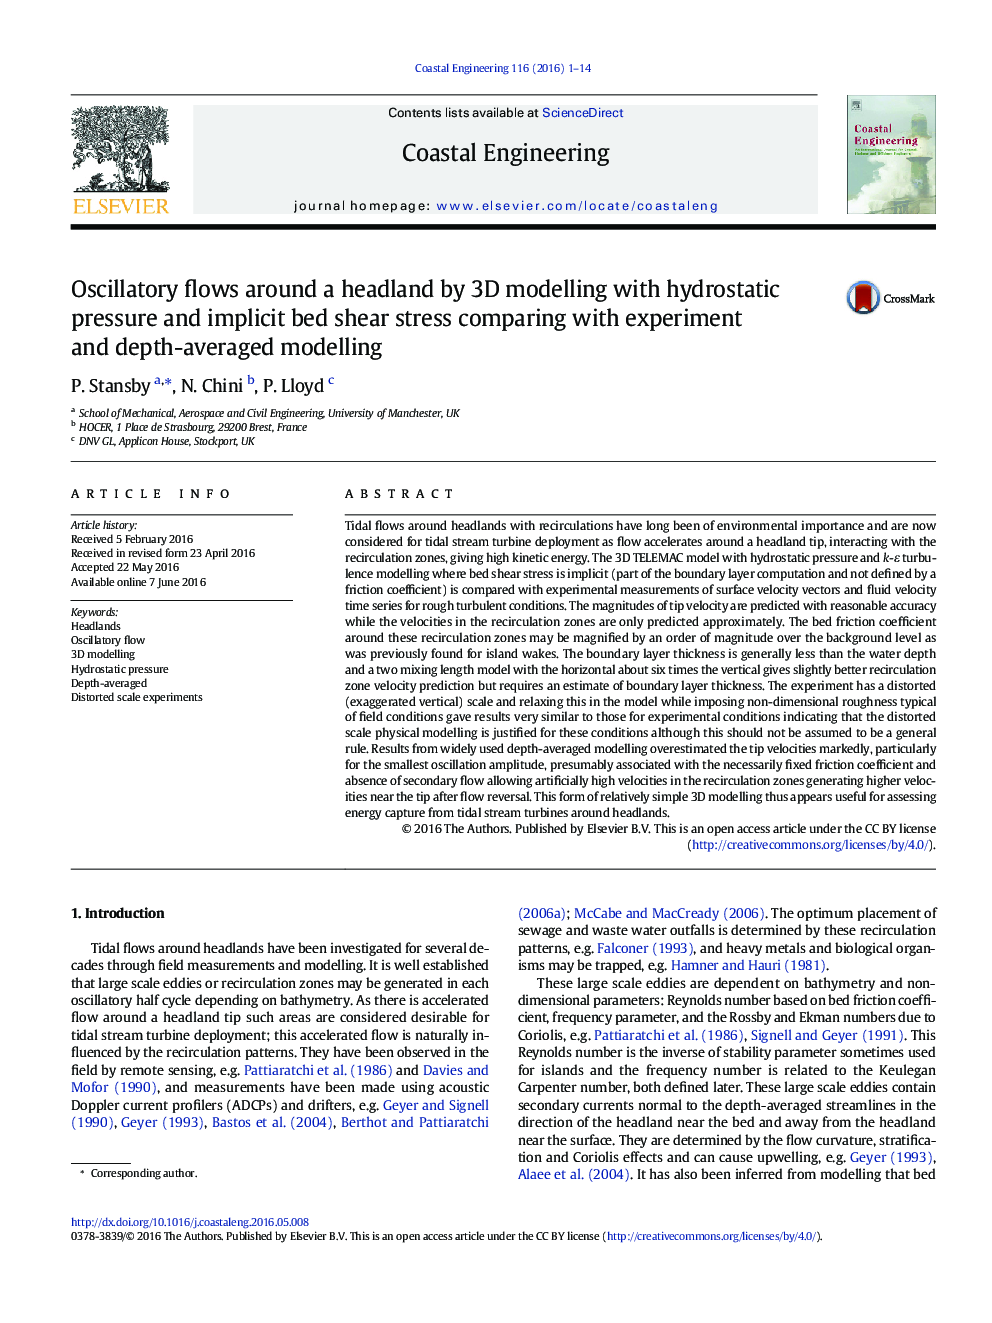 Oscillatory flows around a headland by 3D modelling with hydrostatic pressure and implicit bed shear stress comparing with experiment and depth-averaged modelling